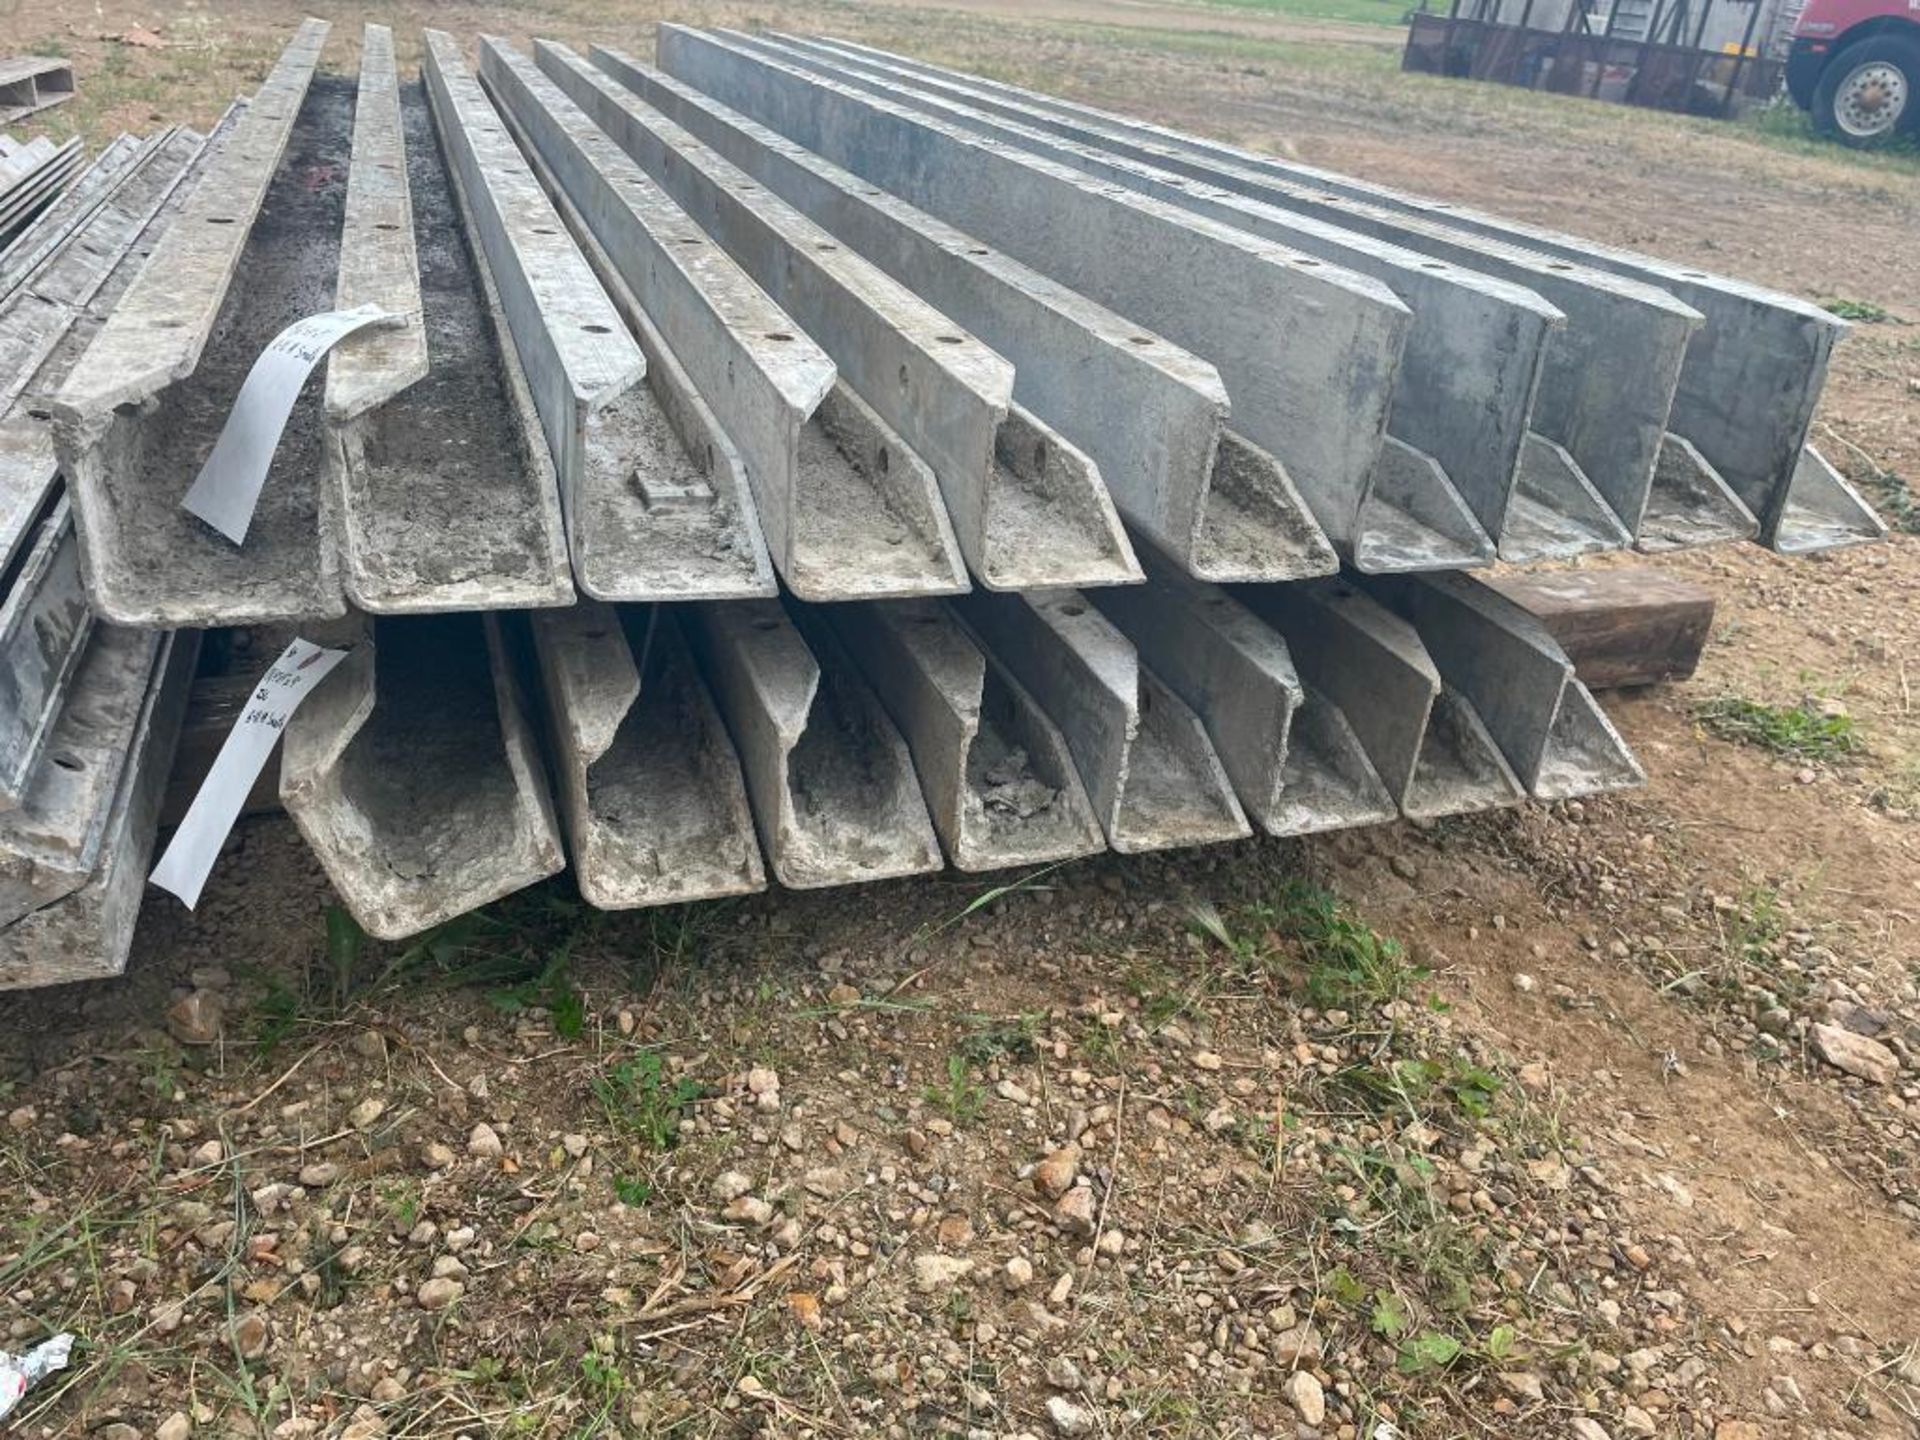 (8) 4" x 4" x 9' Nominal ISC Wall-Ties Smooth Aluminum Concrete Forms 6-12 Hole Pattern. Located in